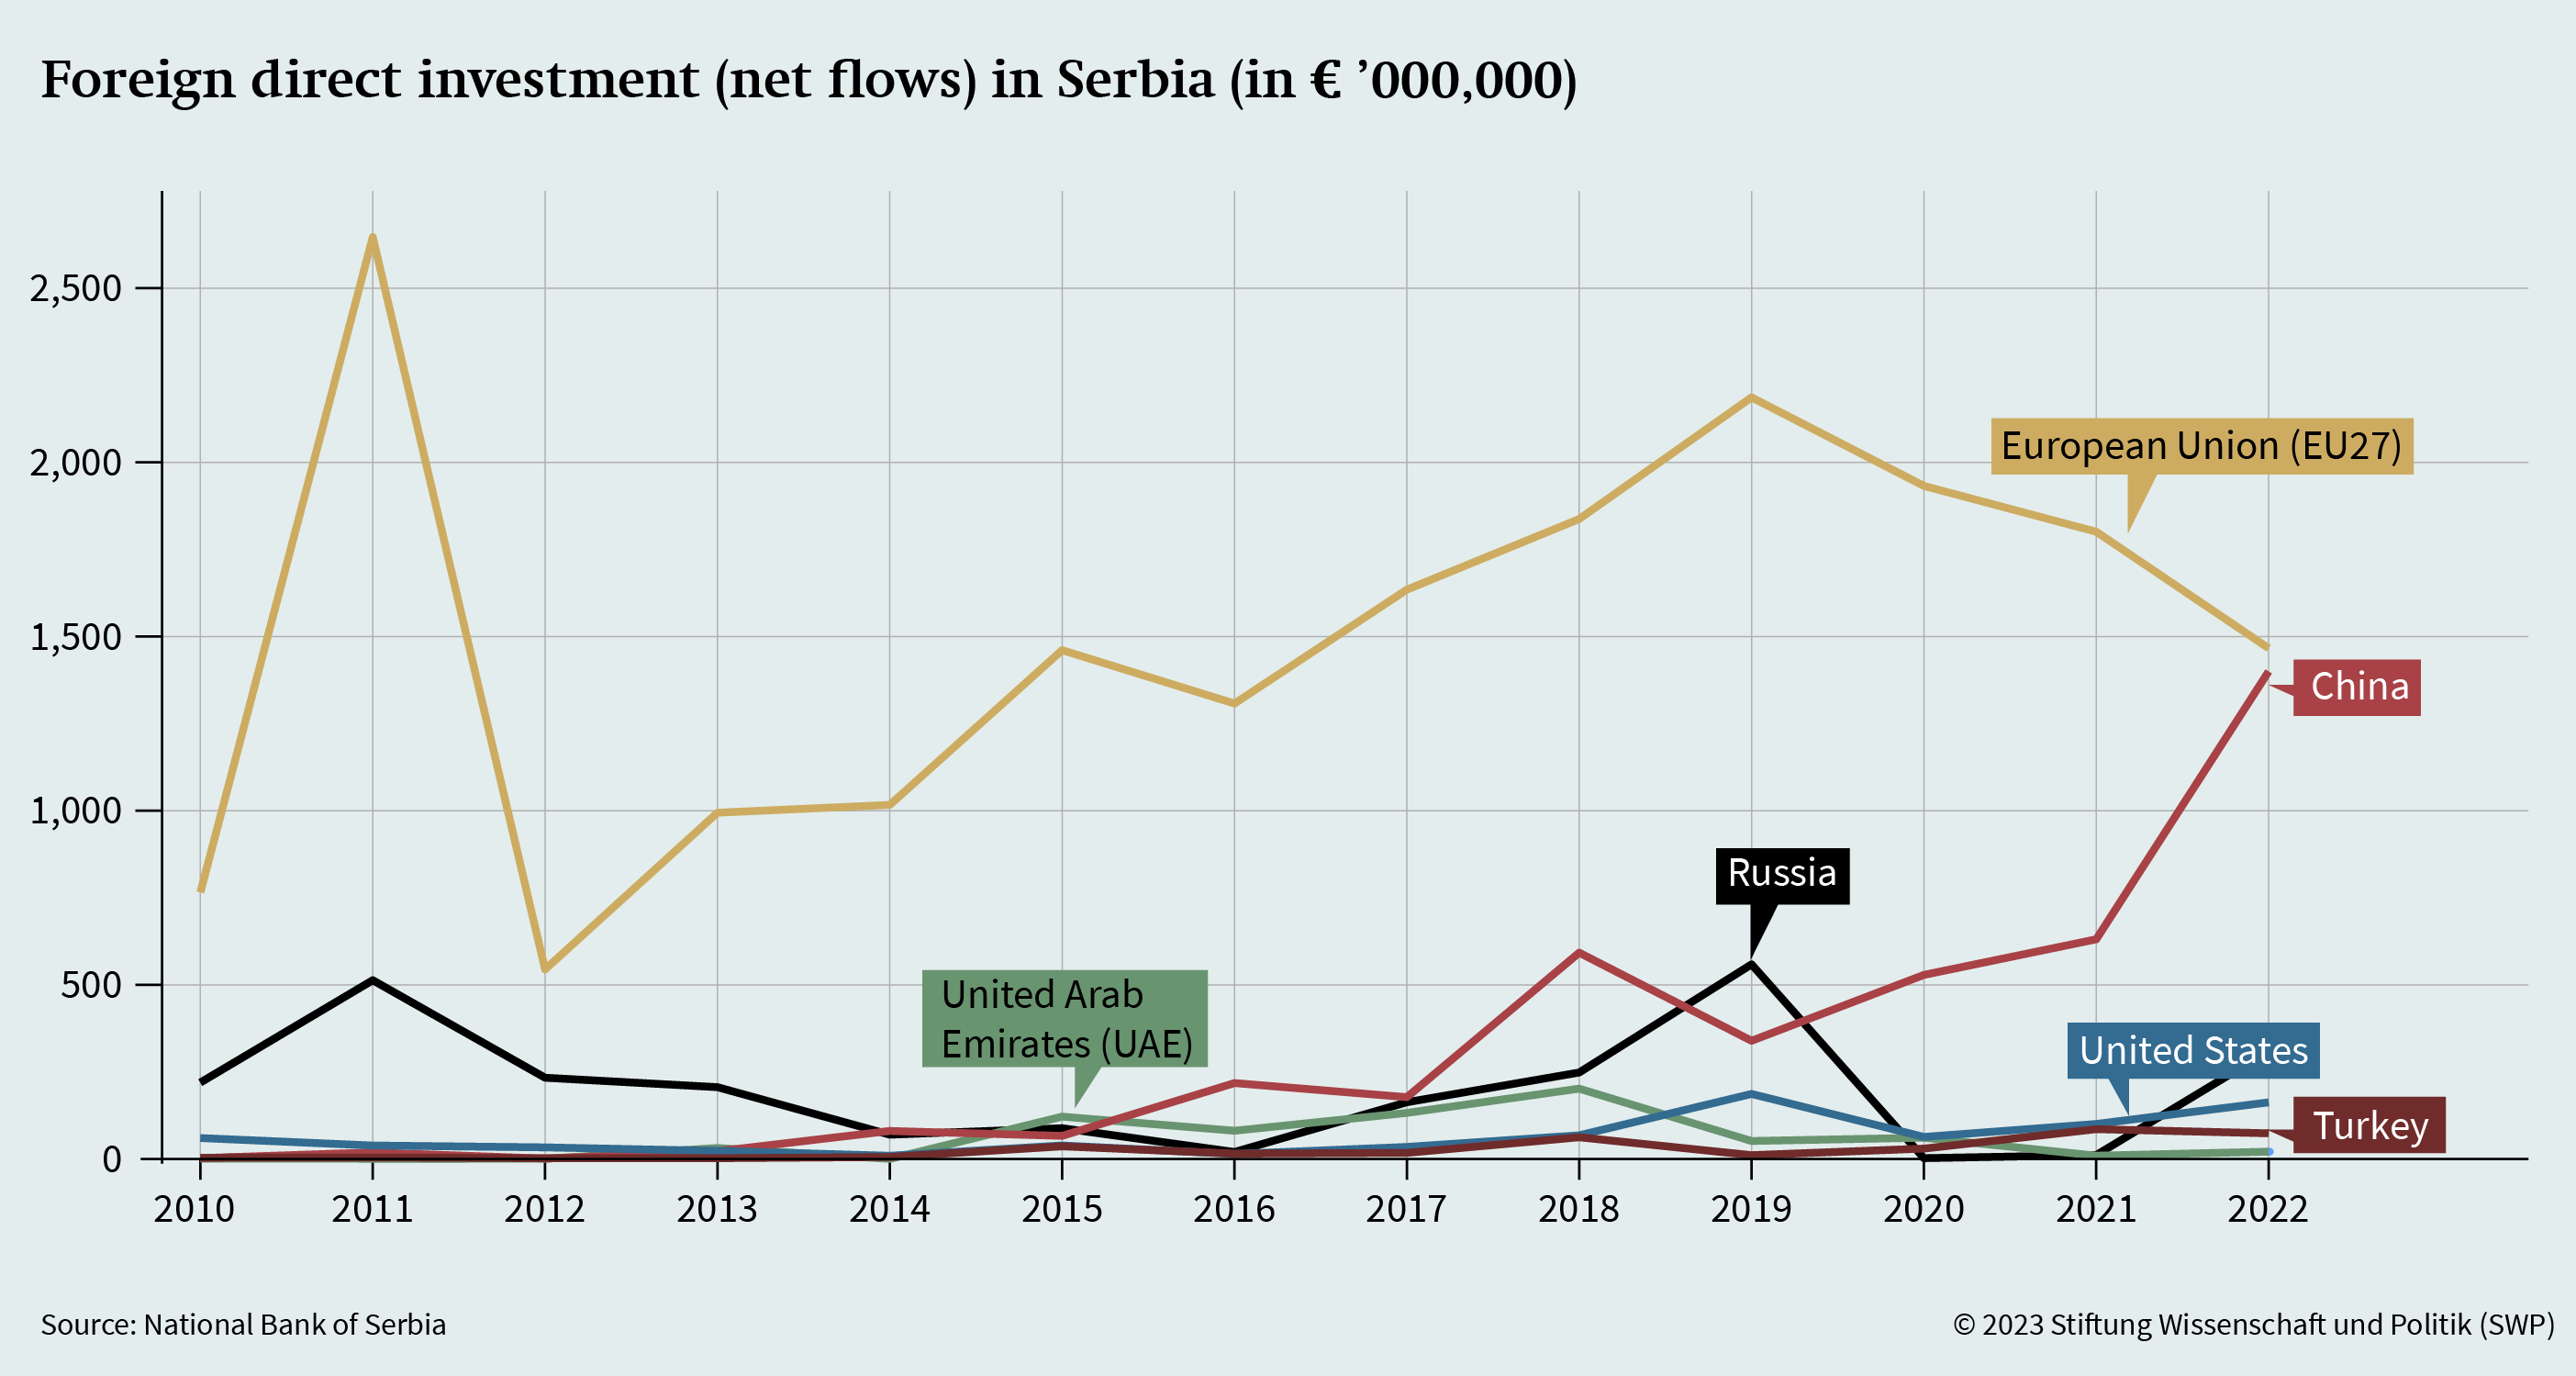 Figure 2: Foreign direct investment (net flows) in Serbia